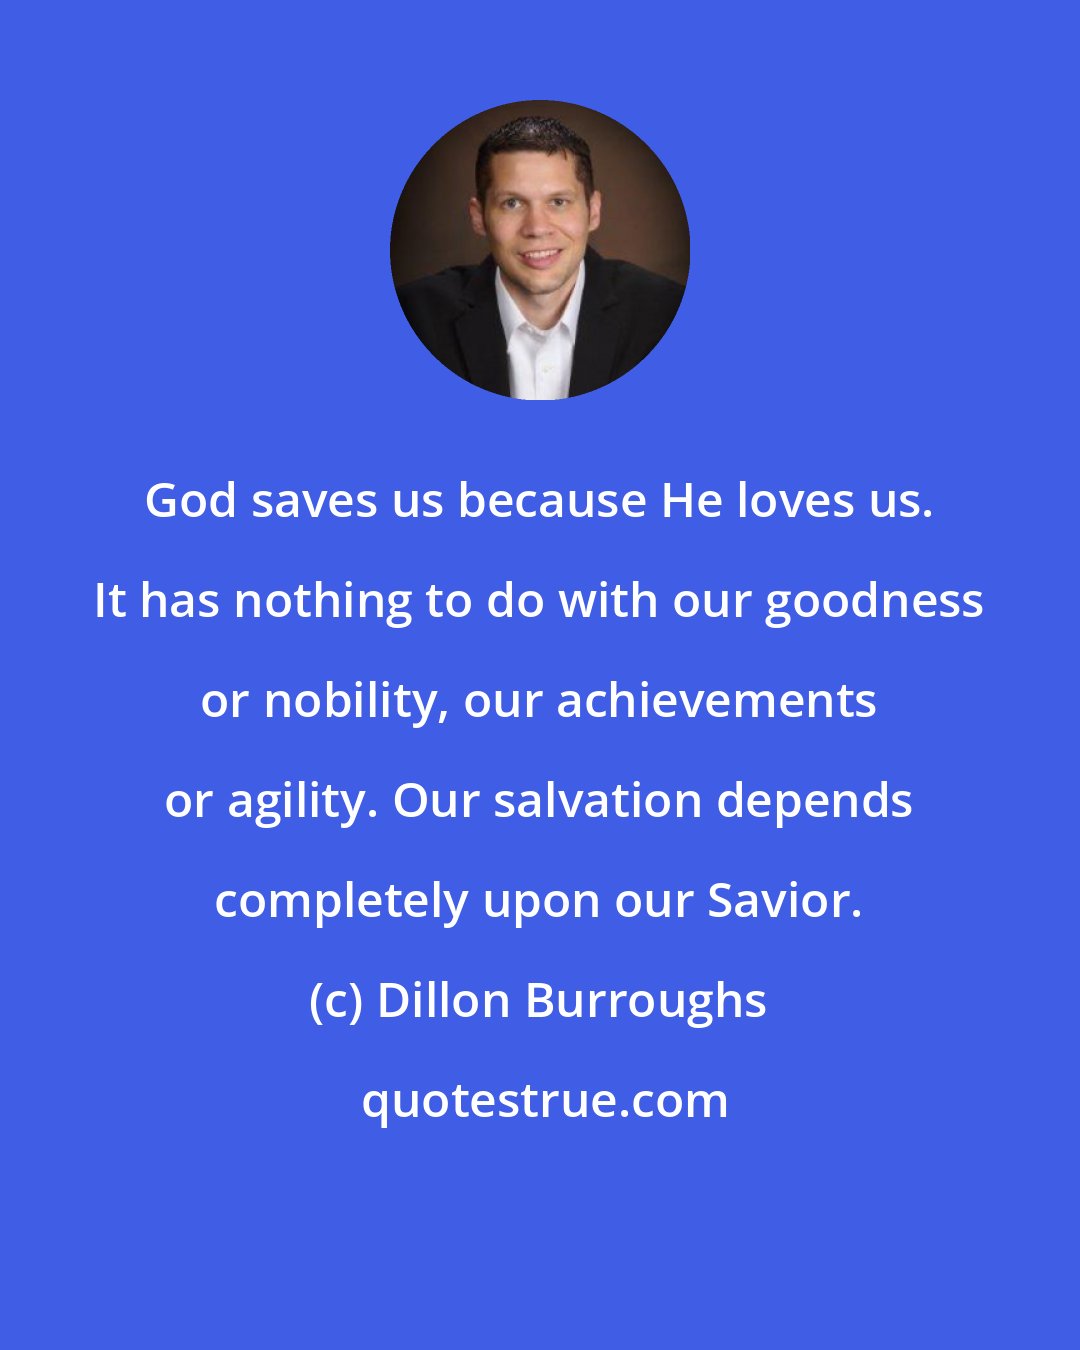 Dillon Burroughs: God saves us because He loves us. It has nothing to do with our goodness or nobility, our achievements or agility. Our salvation depends completely upon our Savior.